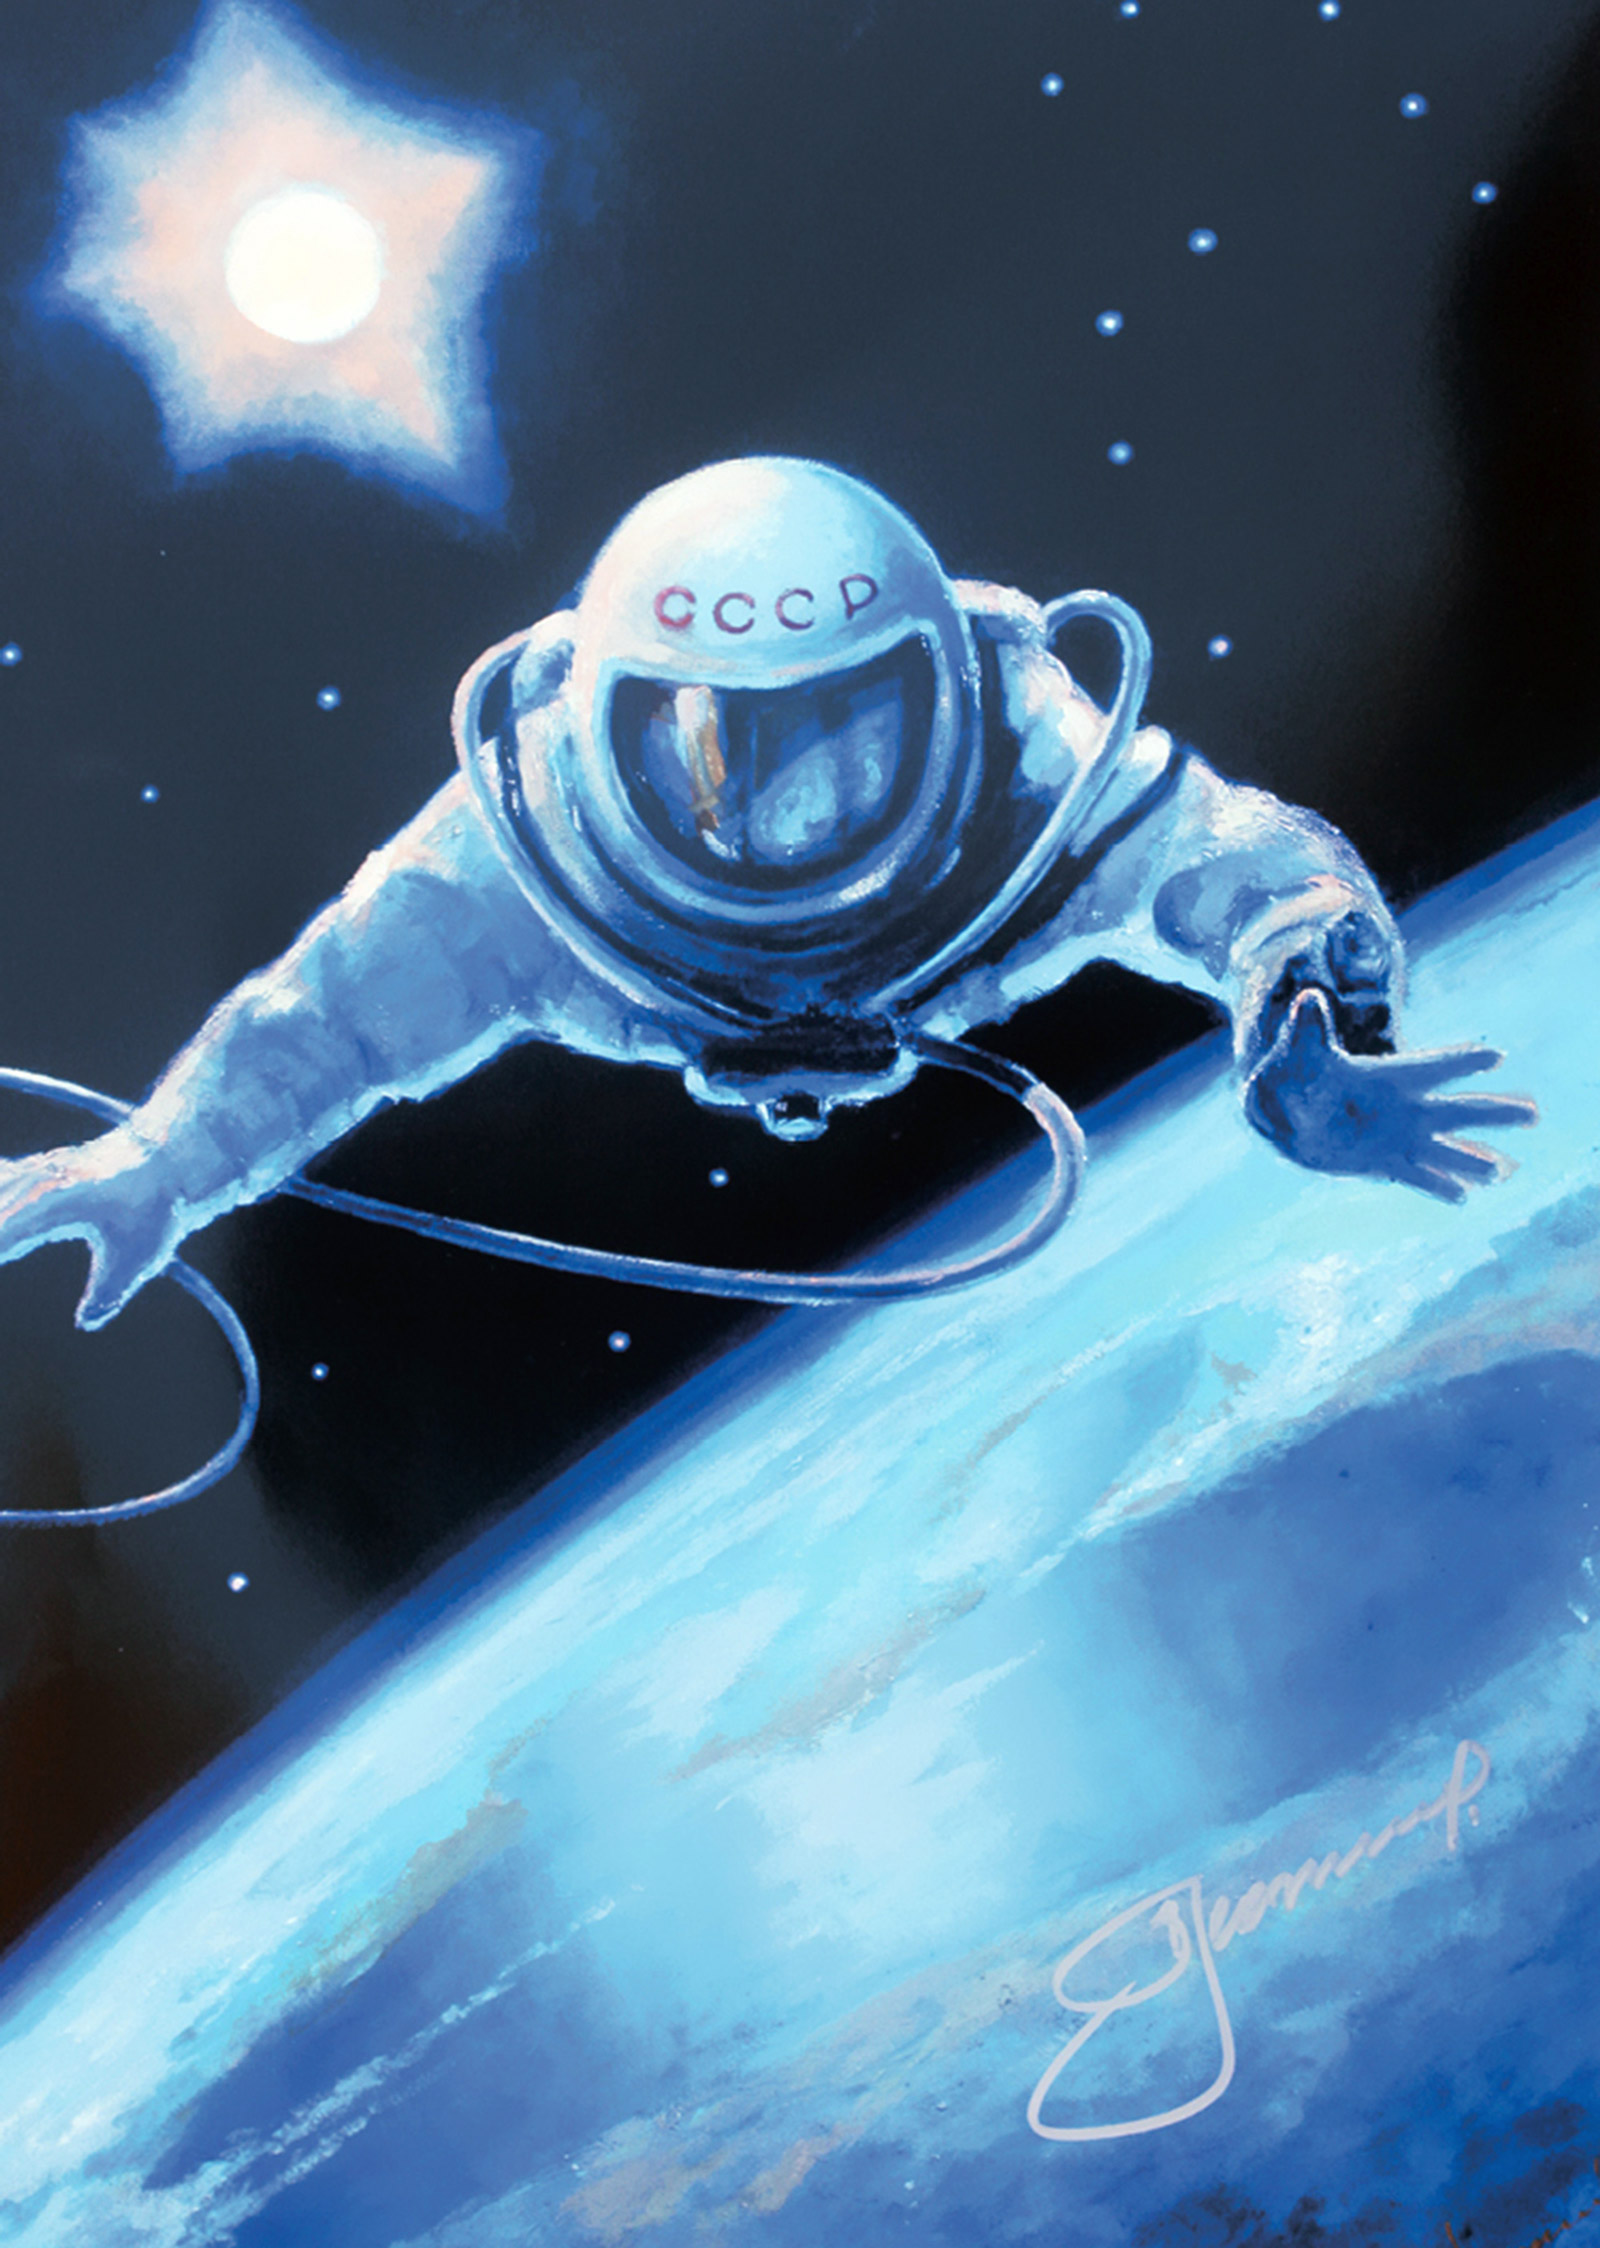 Alexei Leonov, Over the Planet, 2003. Painting of the first spacewalk by the cosmonaut who accomplished it. Courtesy Alex Panchenko.